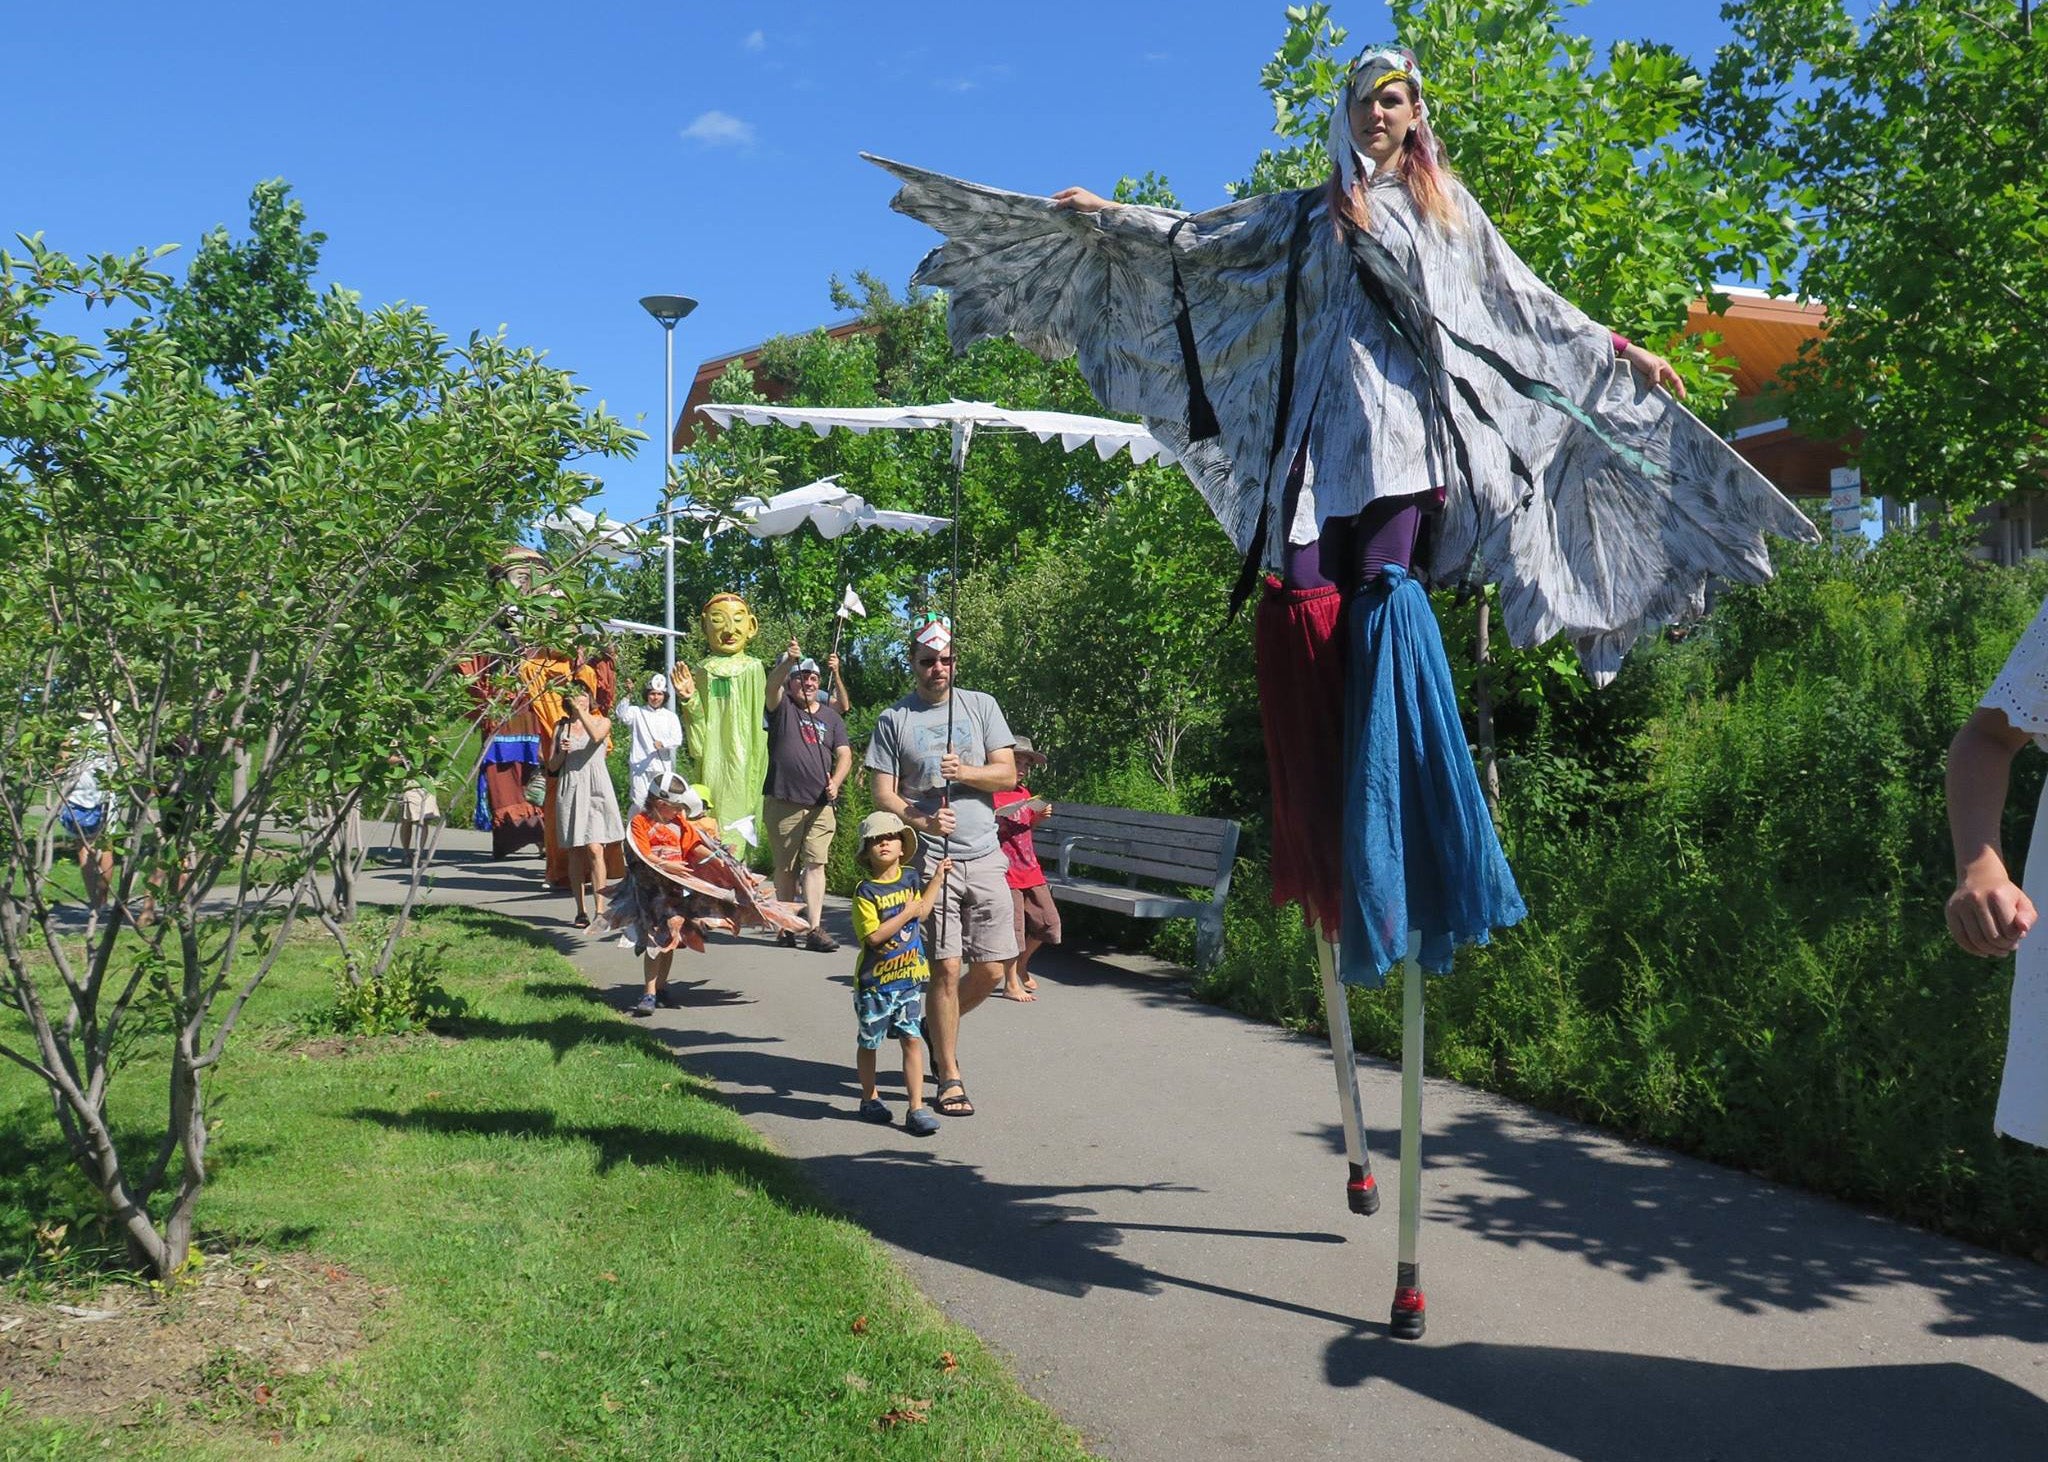 Following an afternoon of workshops, Shadowland Theatre led participants through the paths at Corktown Common to Front Street for a celebratory parade.